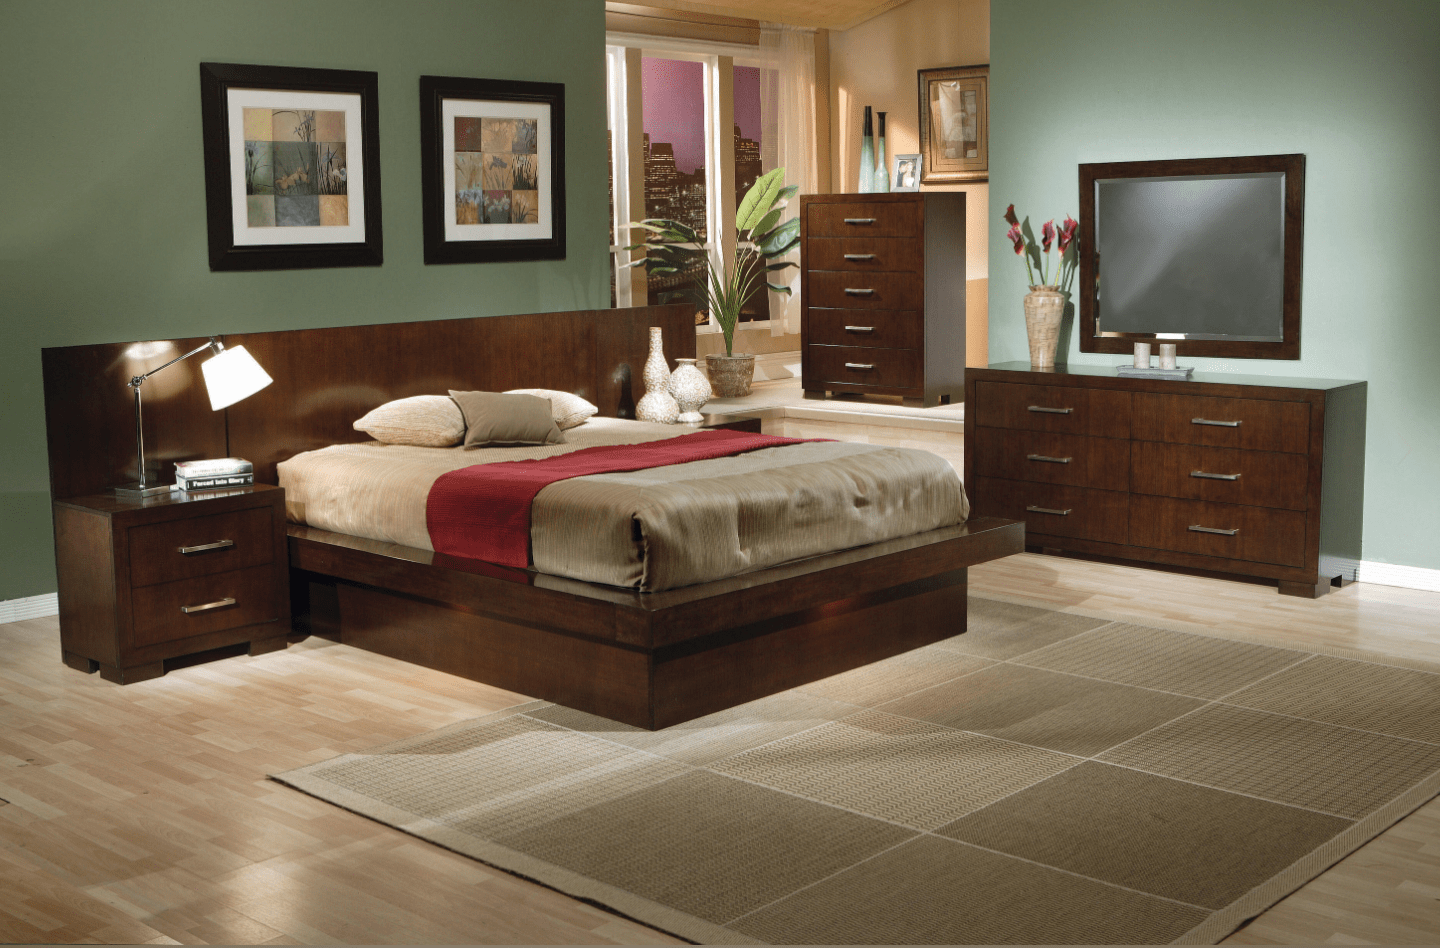 Jessica Queen Platform Bed With Rail Seating in Cappuccino